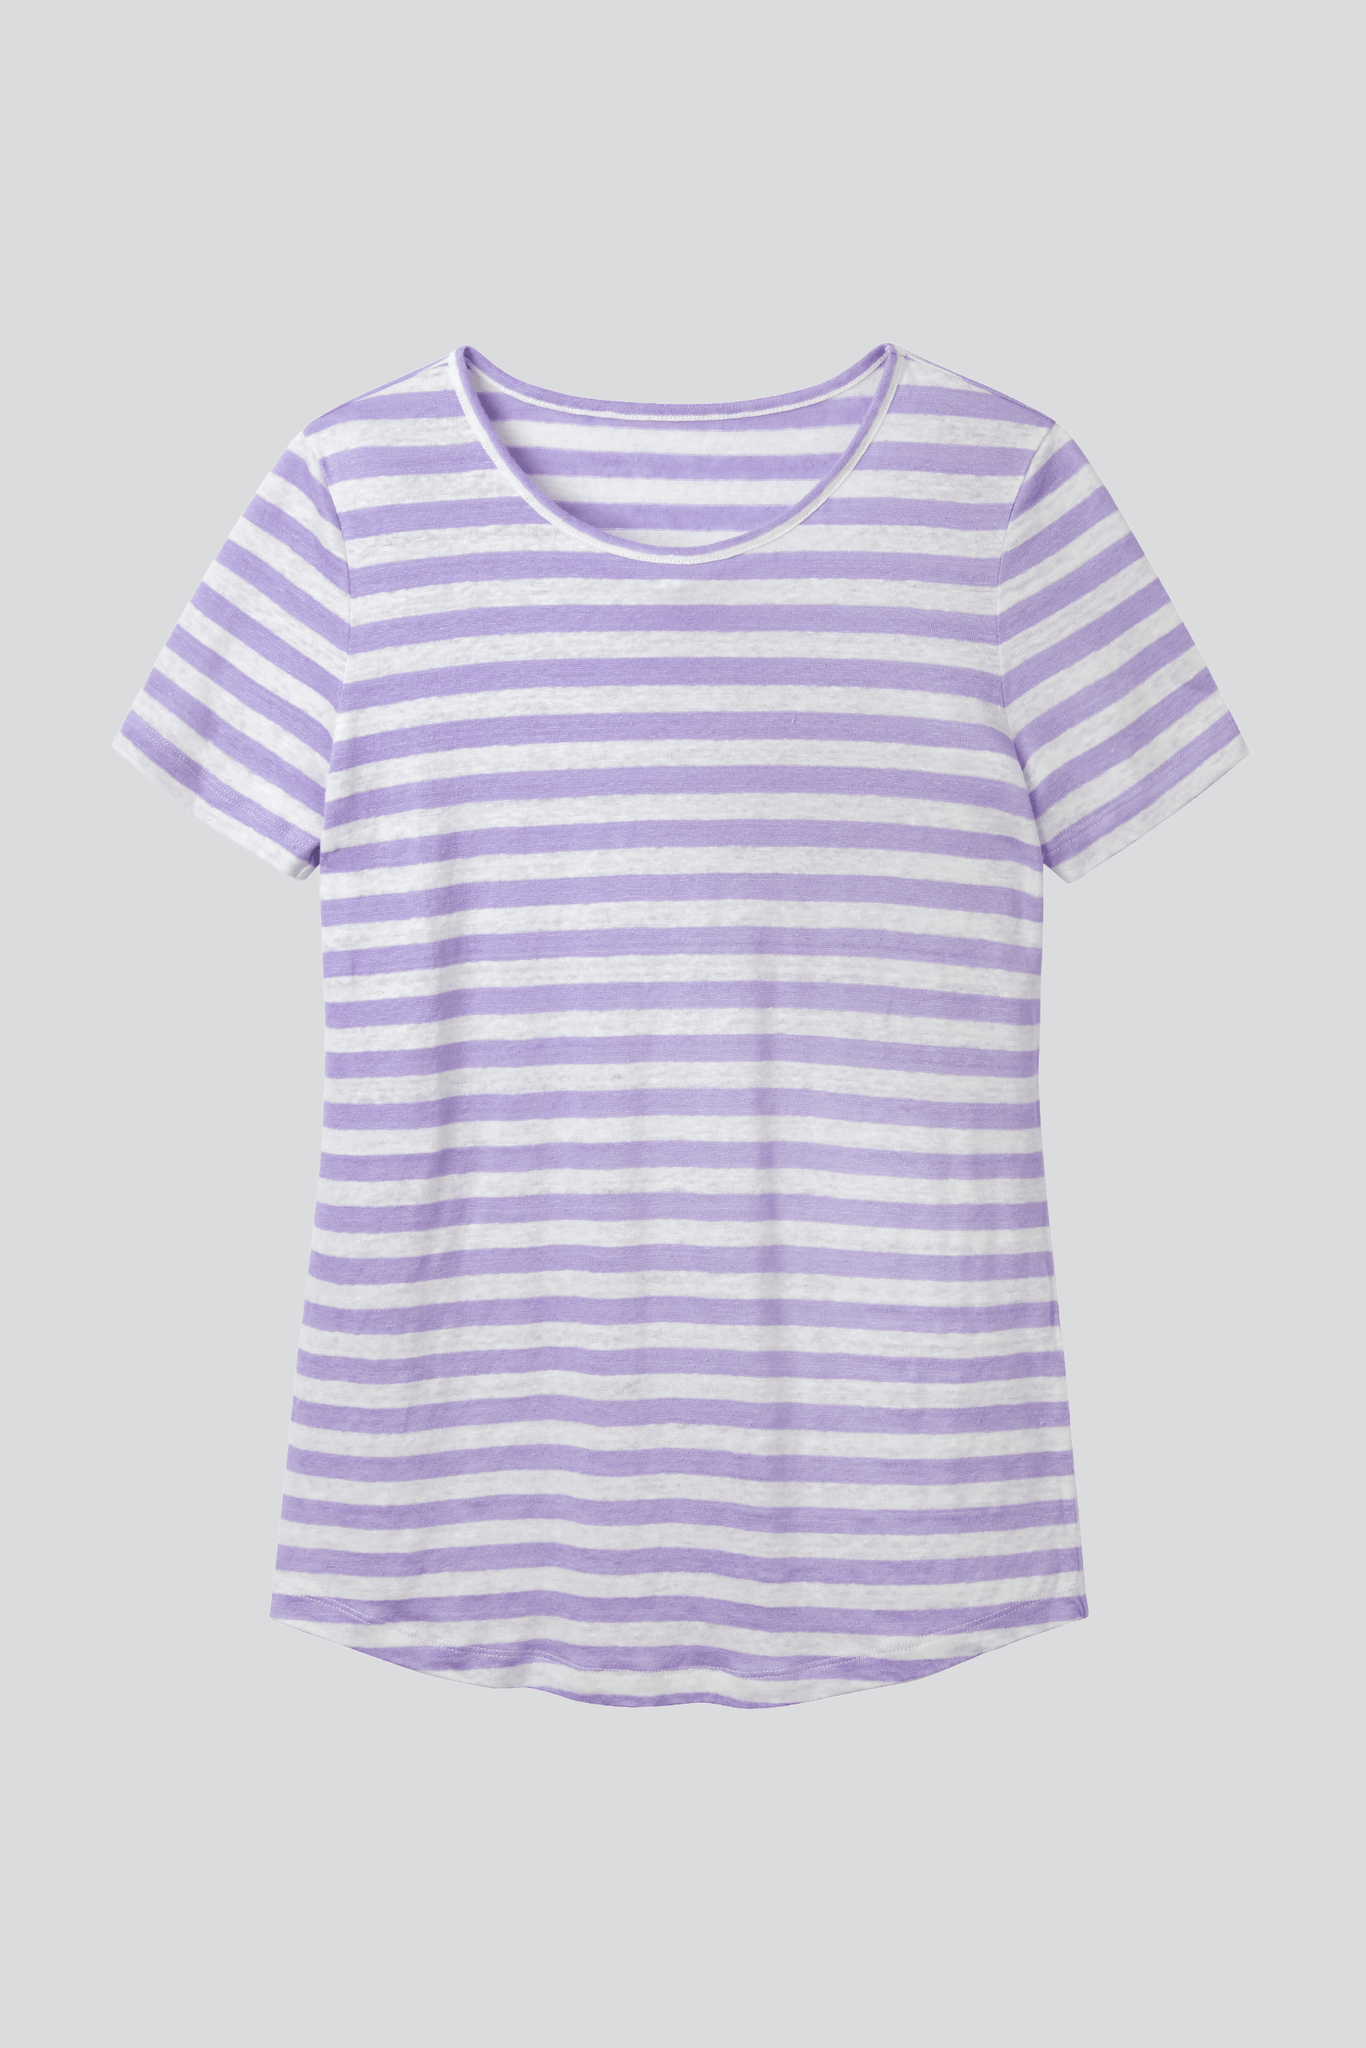 Short Sleeve Striped Linen T-shirt in Lavender - Women's Short Sleeve T-shirt - Soft Linen T-Shirt - Lavender Hill Clothing